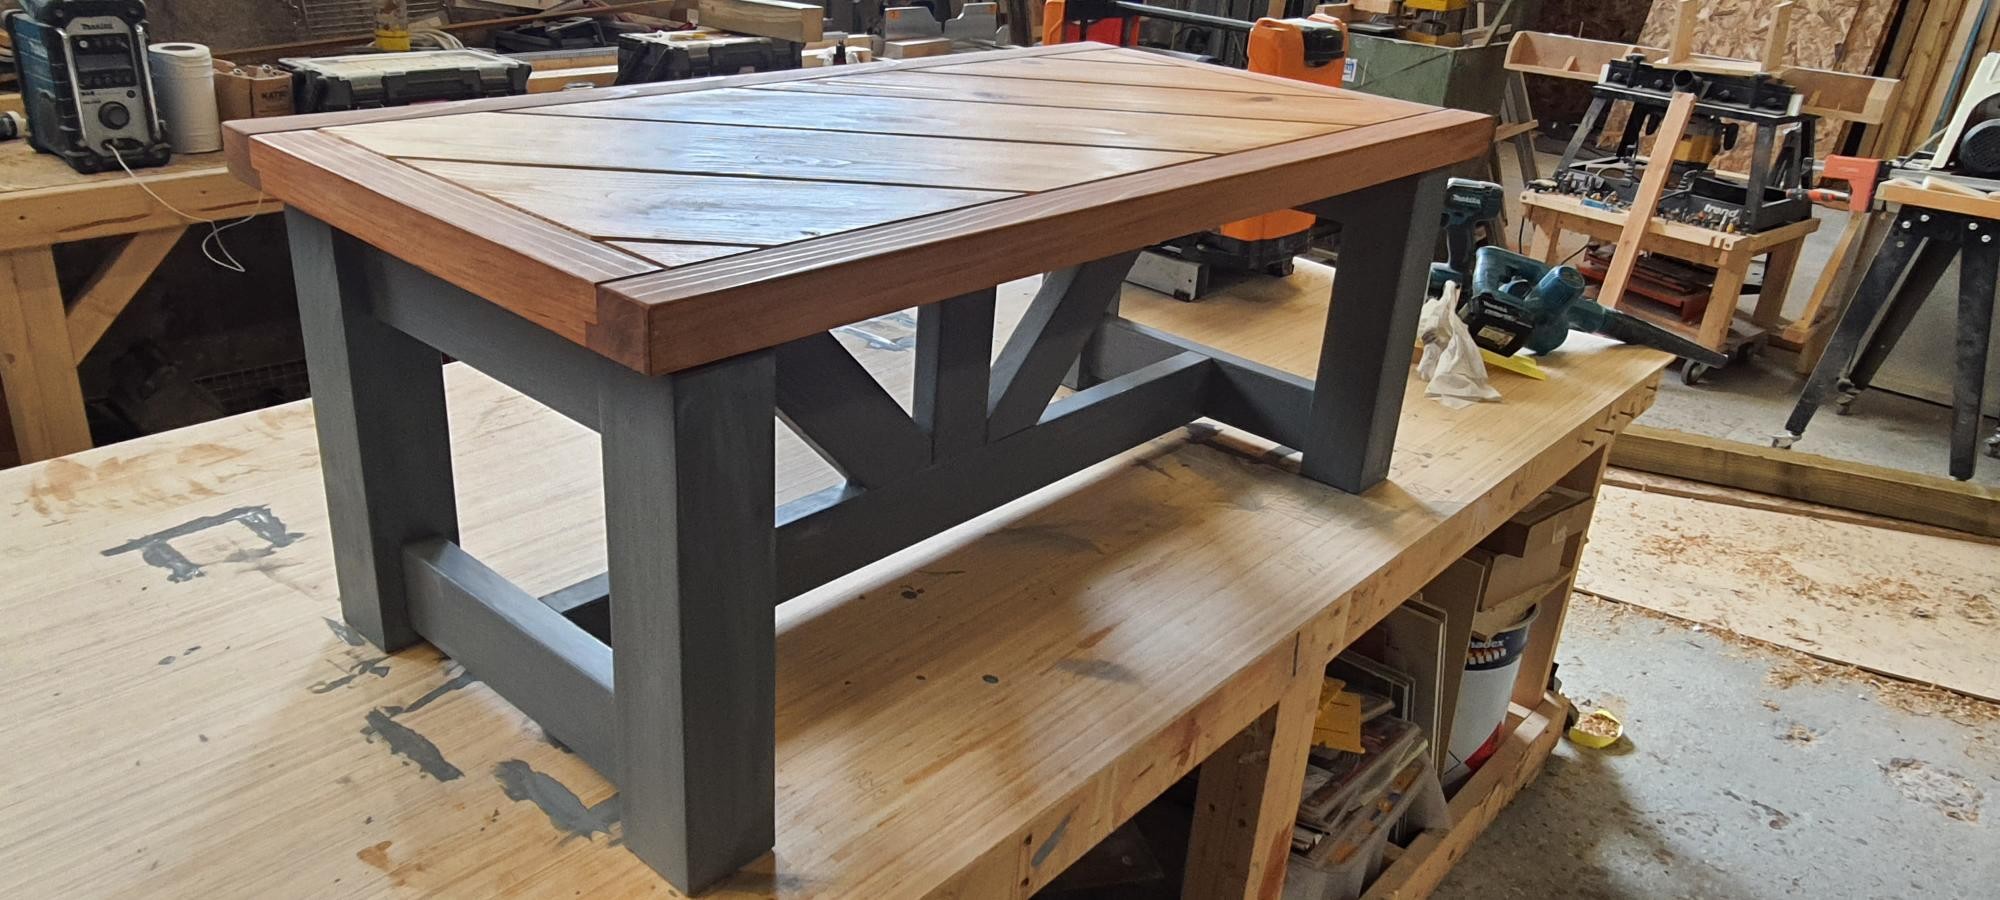 SJB Joinery